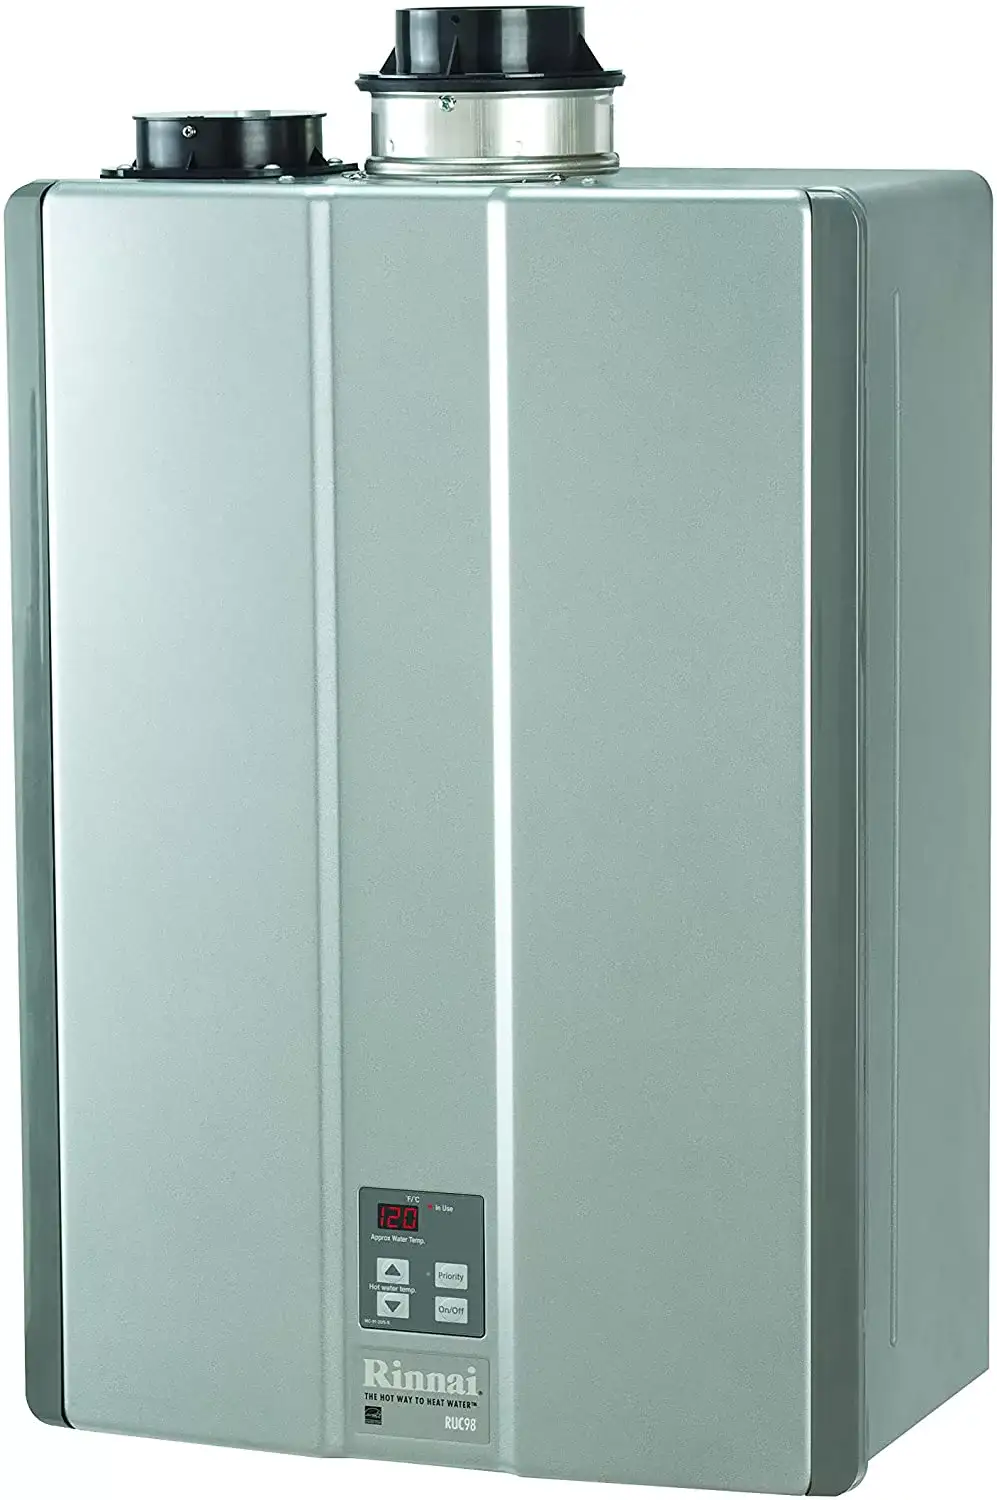 Rinnai RUC98iN Ultra Series Indoor Natural Gas Tankless Water Heater